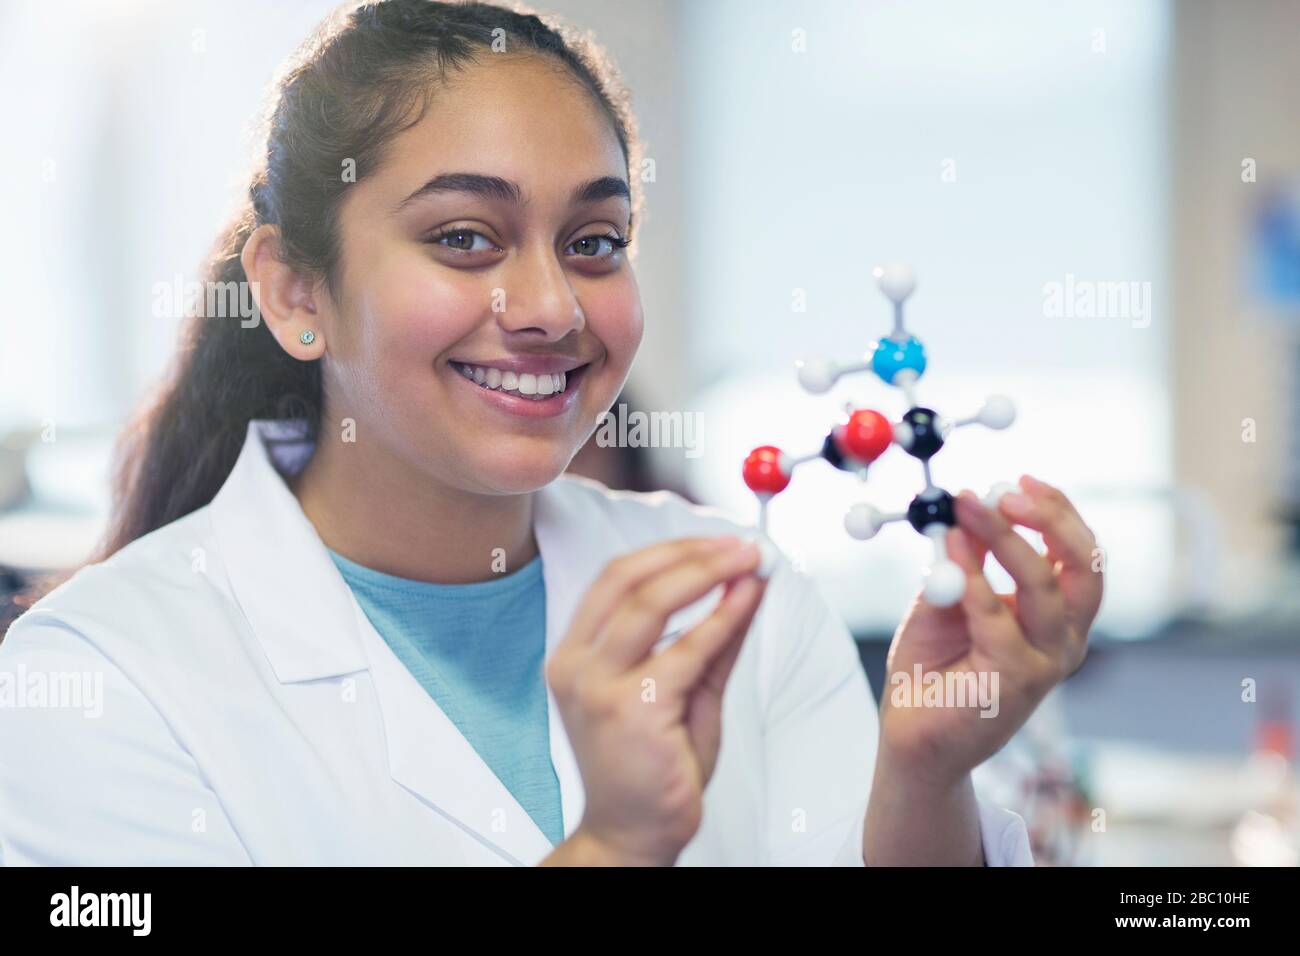 Portrait smiling girl student holding molecular model in laboratory classroom Stock Photo